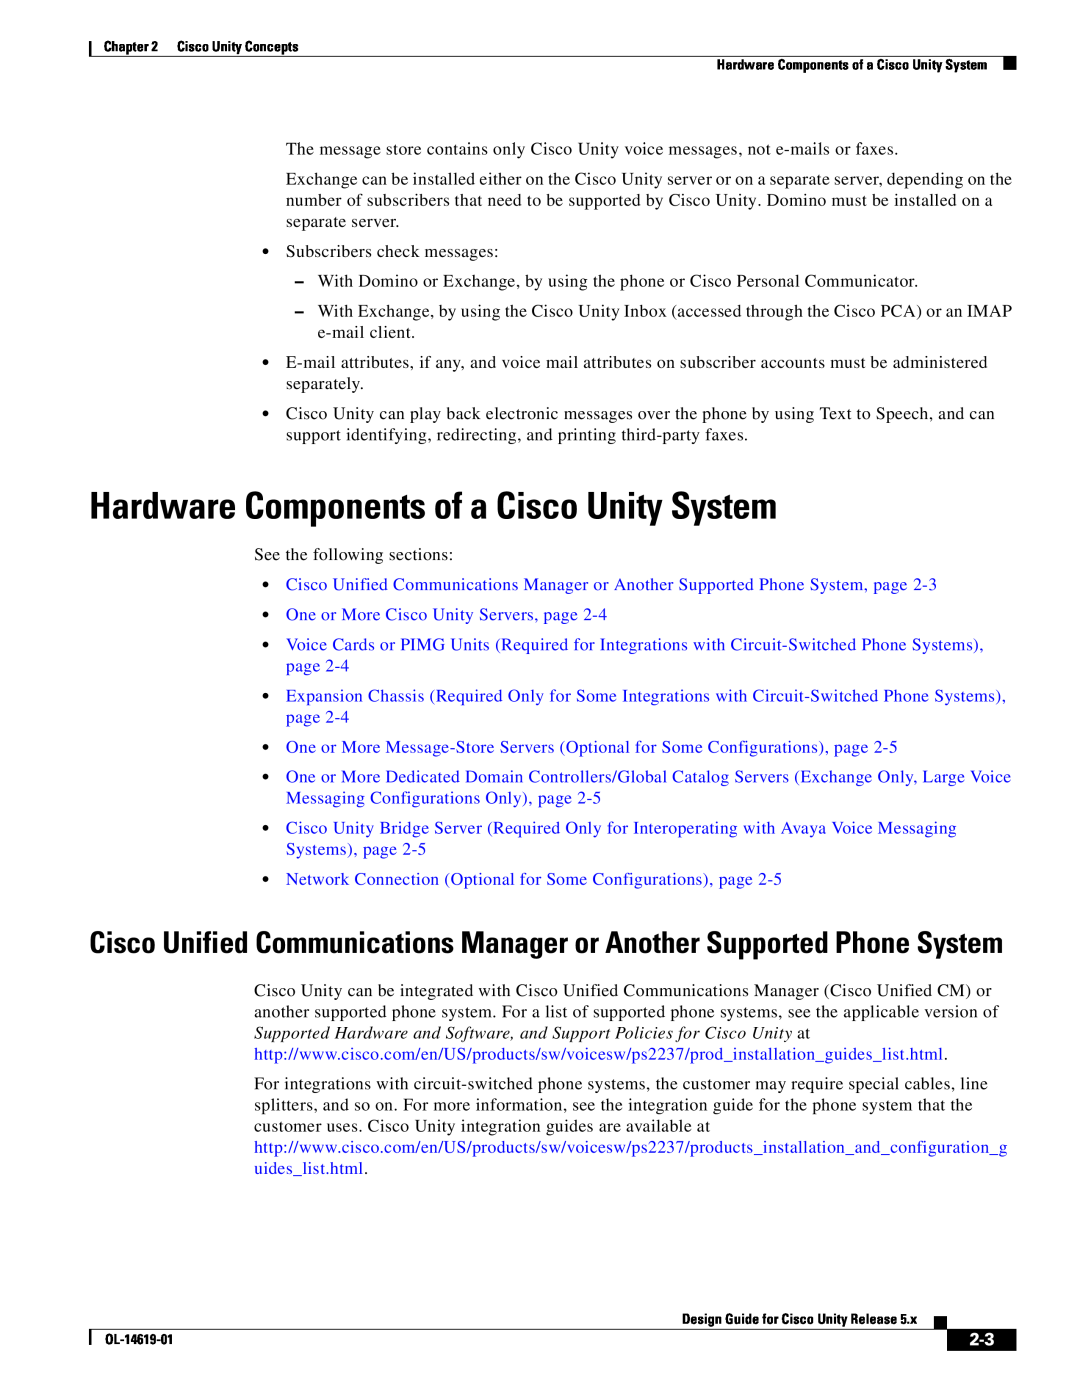 Cisco Systems OL-14619-01 manual Hardware Components of a Cisco Unity System, One or More Cisco Unity Servers, page 